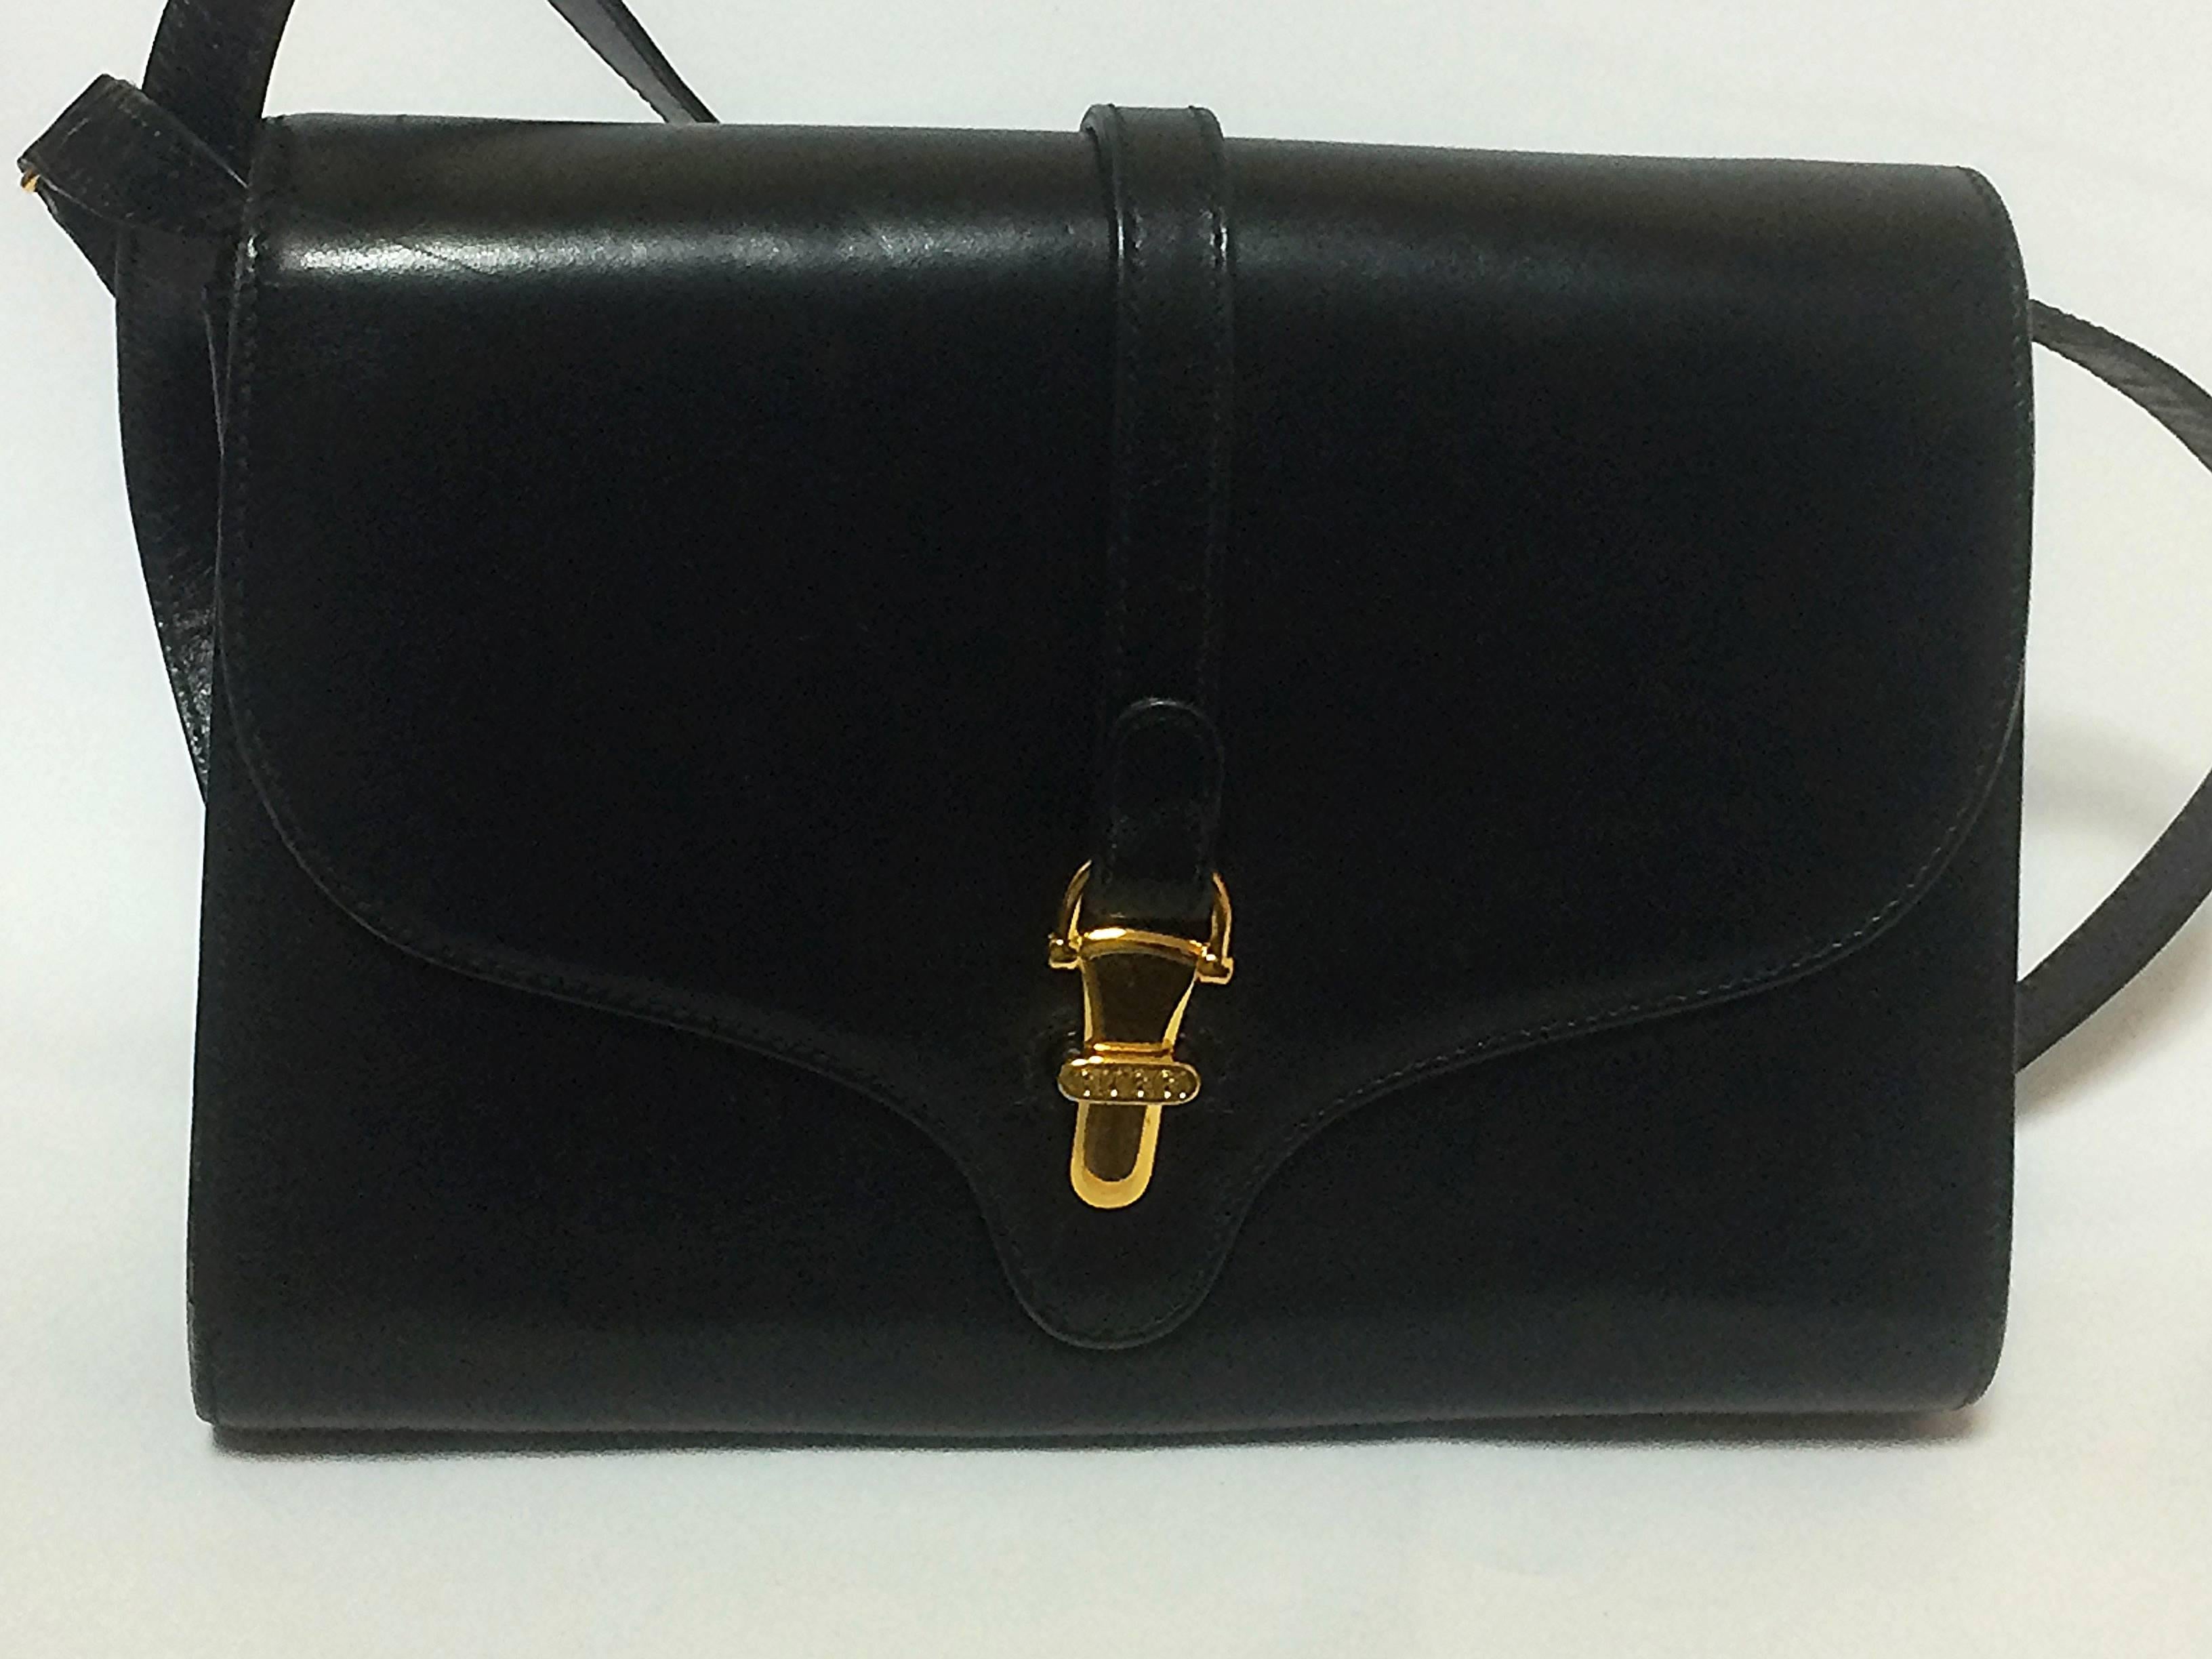 1980s. Vintage Gucci black leather clutch shoulder bag with logo motif closure. Classic and elegant daily use vintage Gucci bag

Introducing a masterpiece, leather shoulder from Gucci back in the 80's.
Very sophisticated purse that would never go